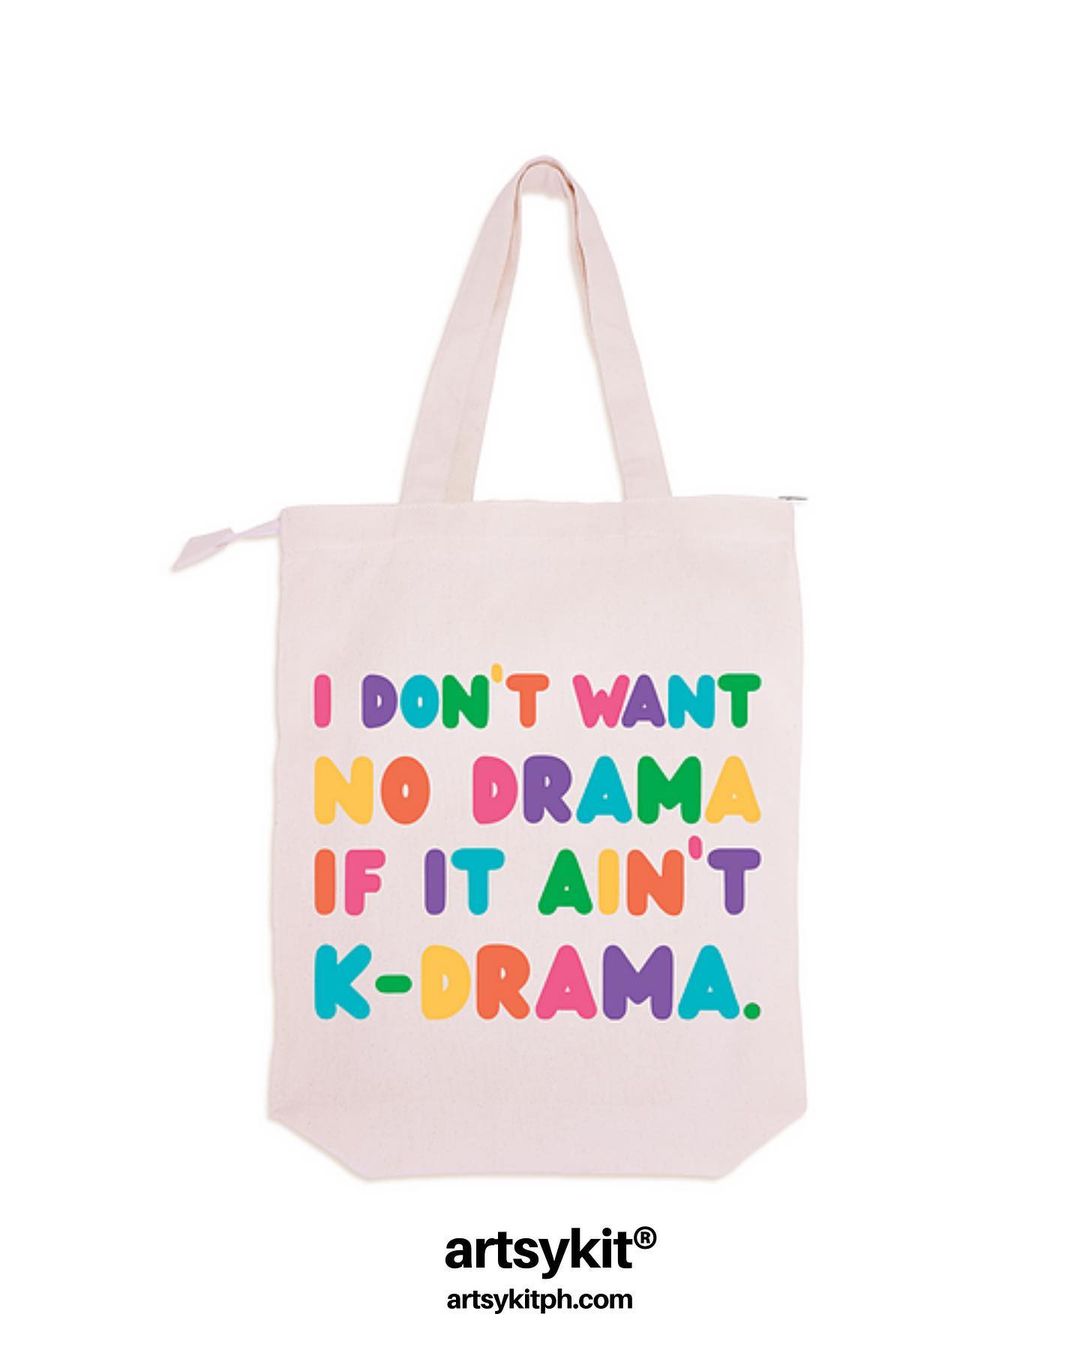 Where to buy K-drama-themed tote bags